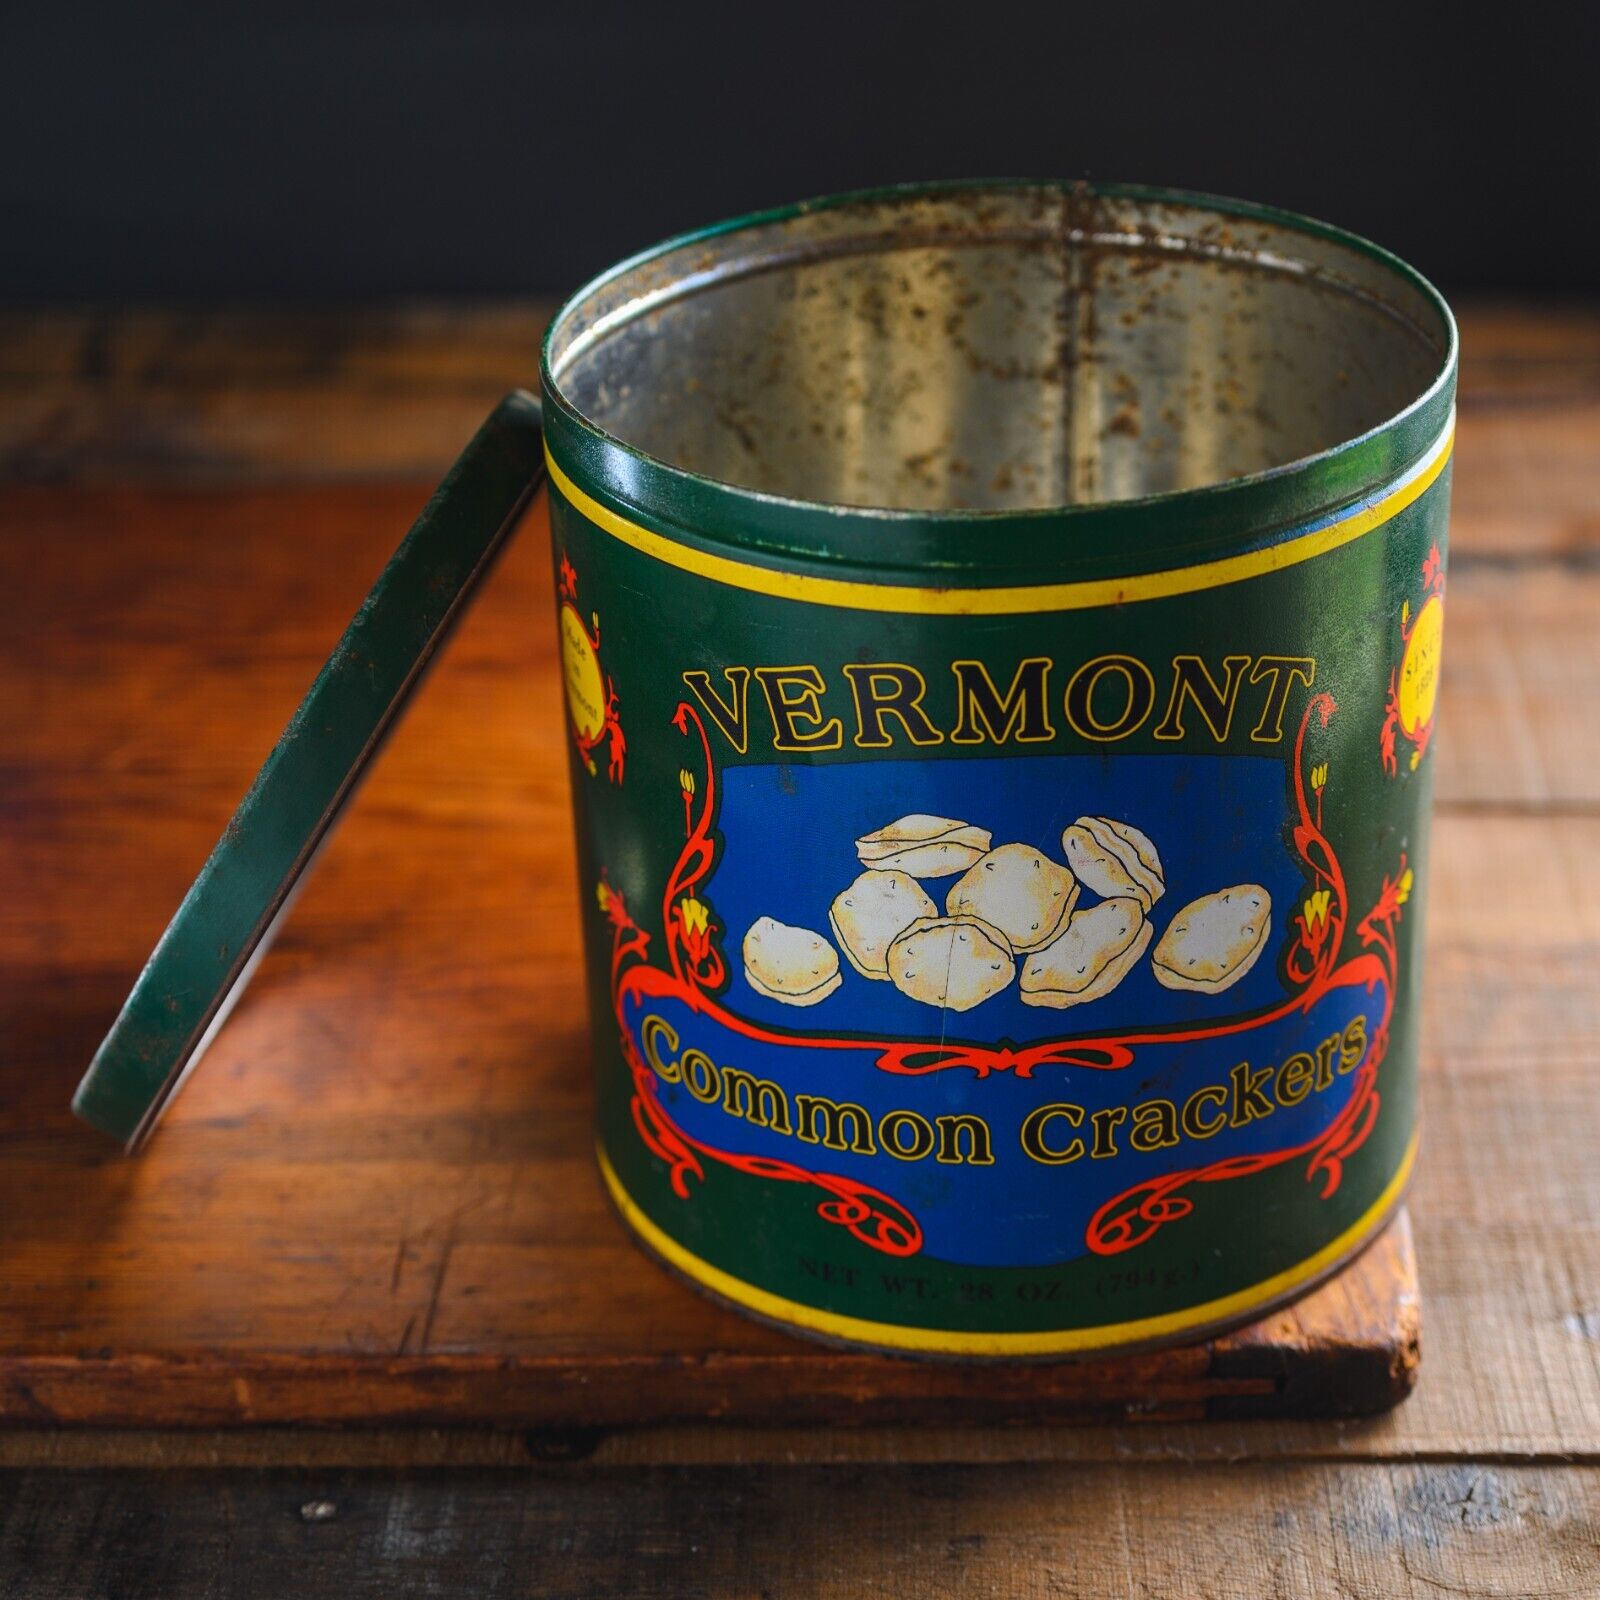 90's Vintage Vermont Common Crackers Tin 28 oz Wear and Patina